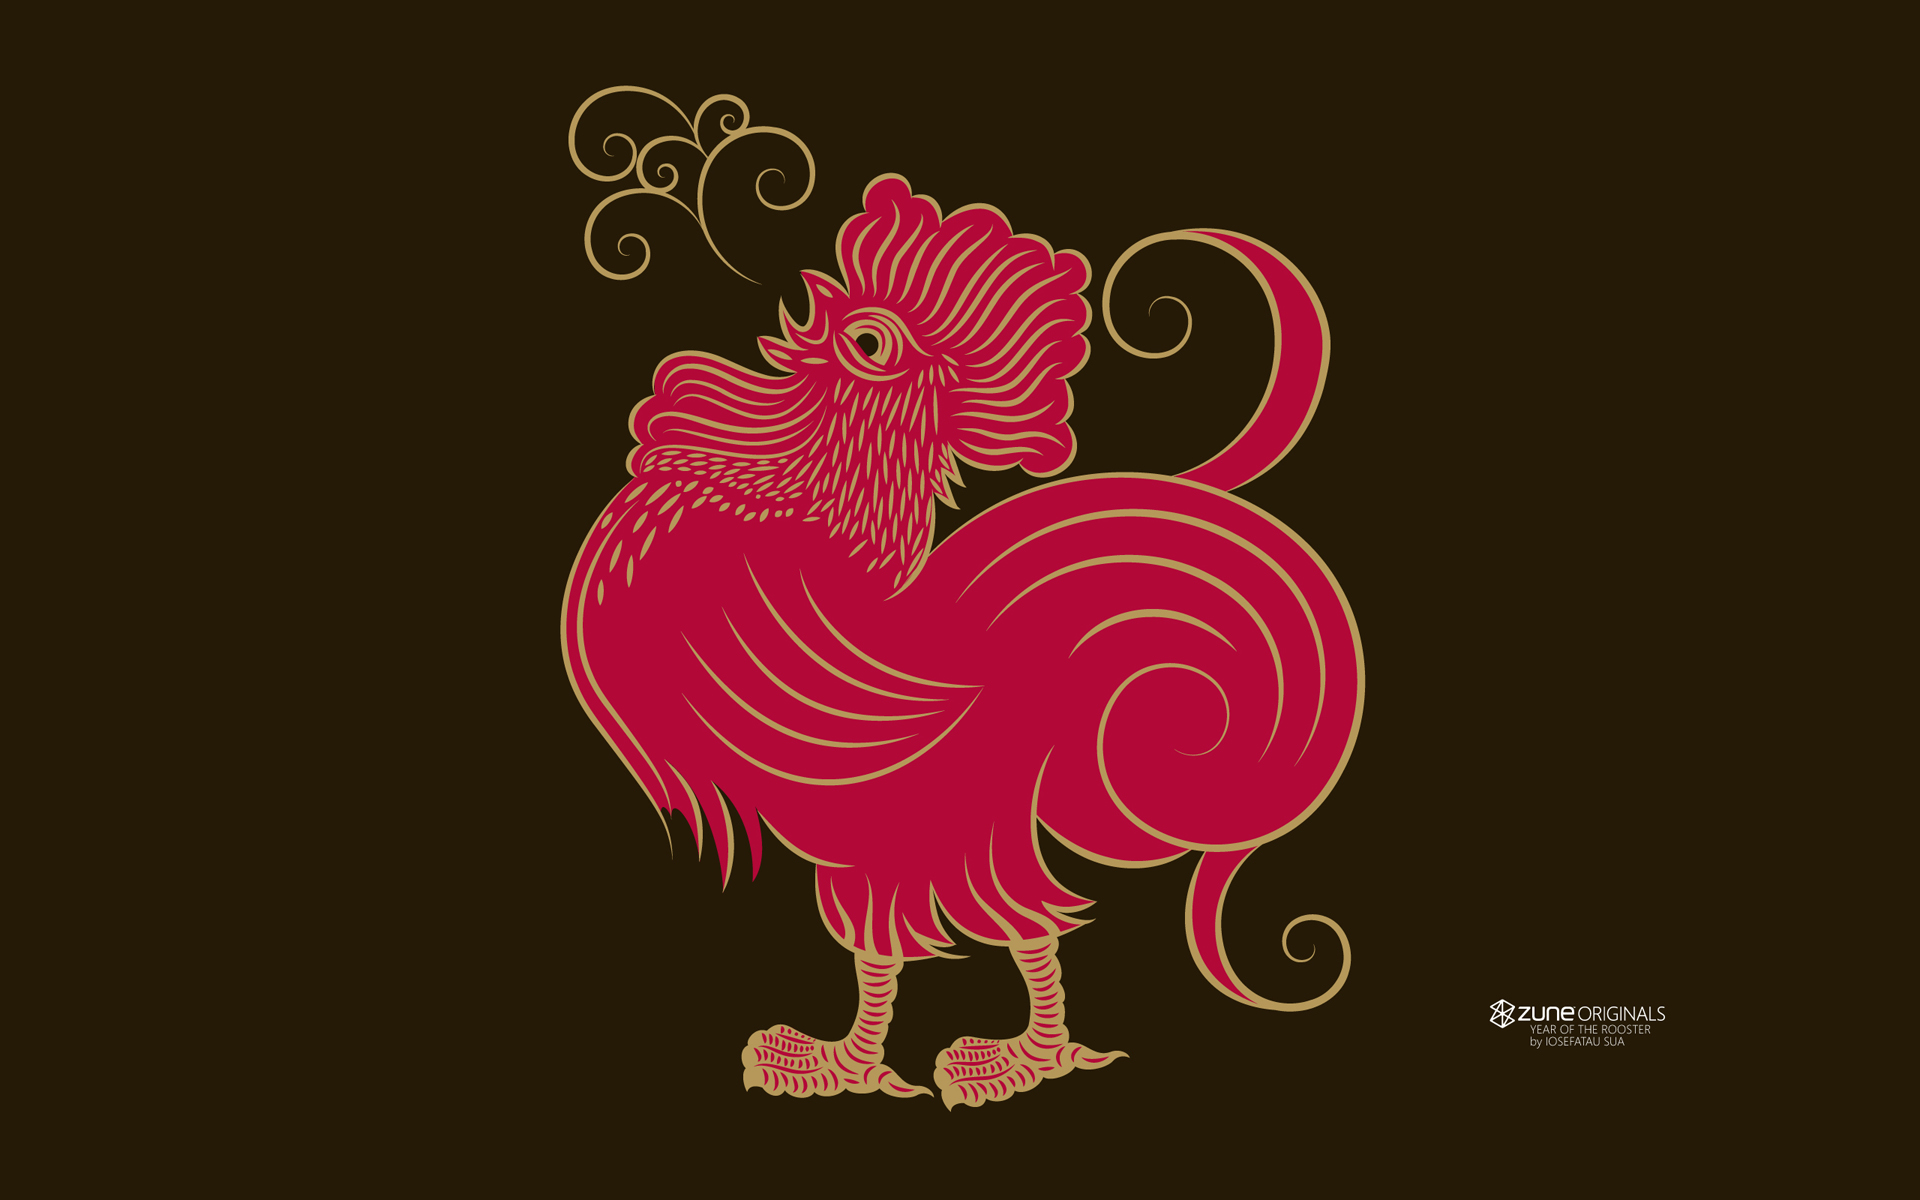 Year Of The Rooster by Iosefatau Sua